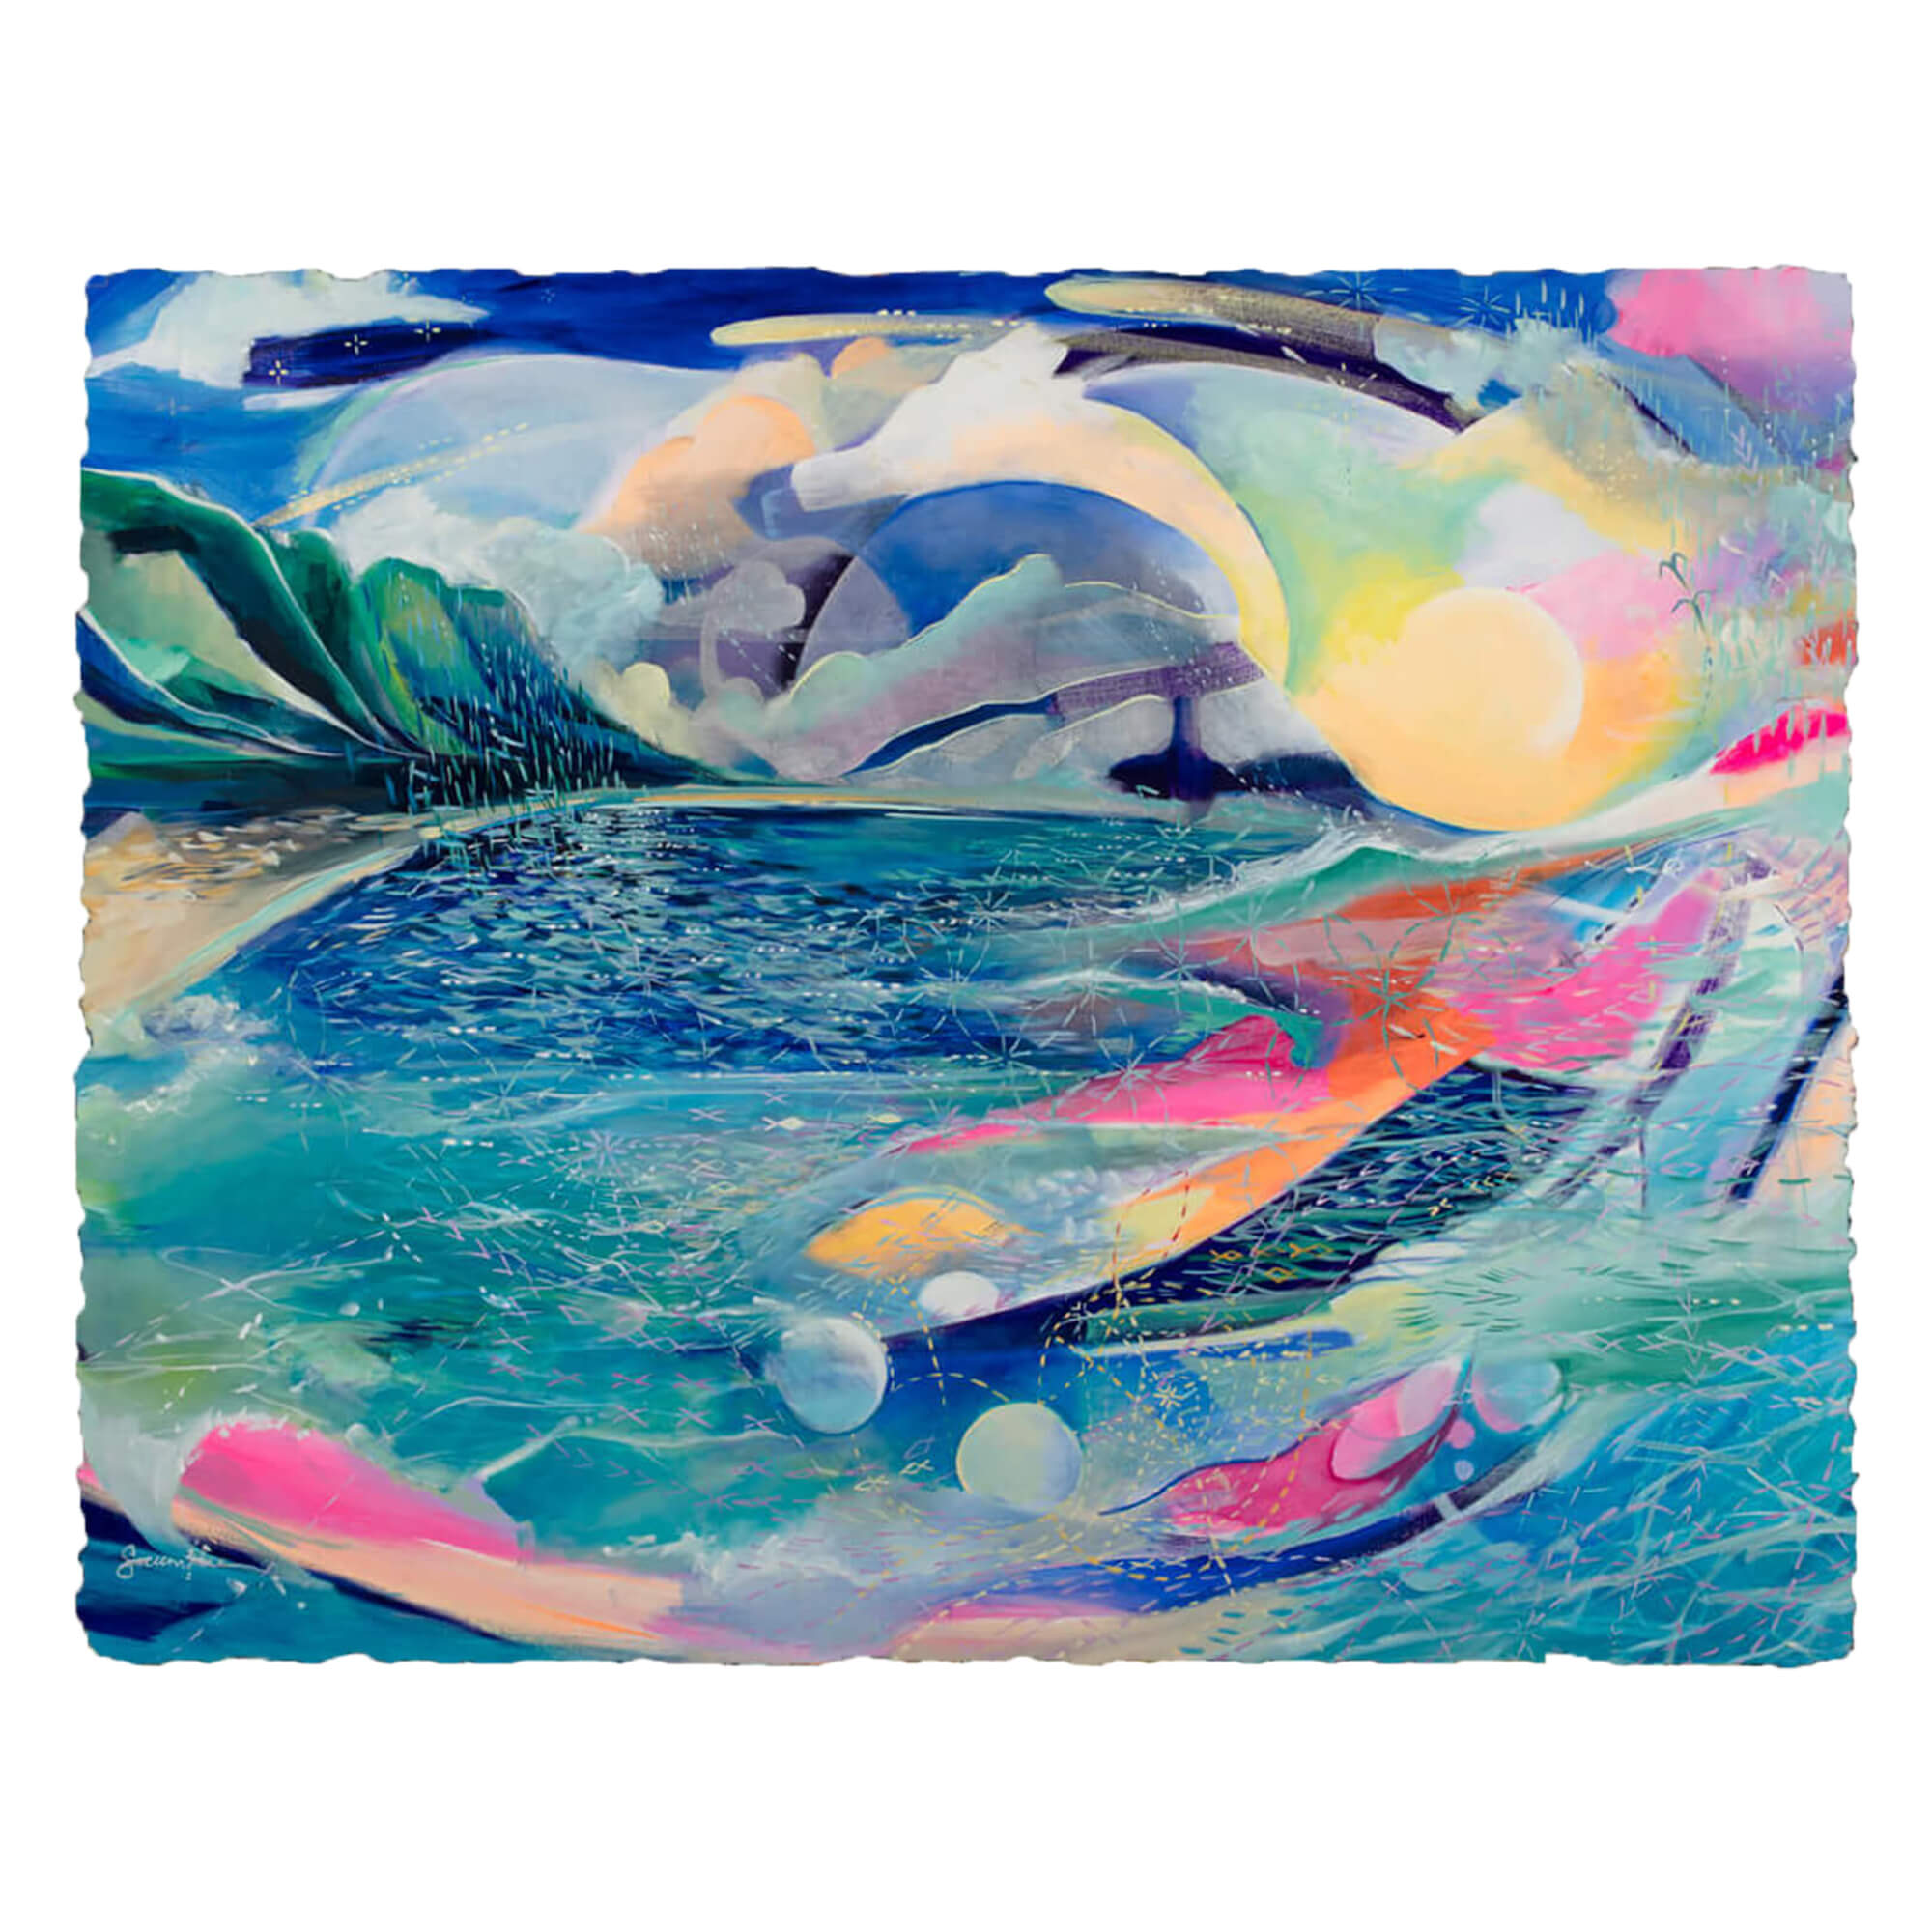 A deckled paper art print of an abstract artwork of a seascape with vibrant pastel colors Hawaii artist Saumolia Puapuaga 